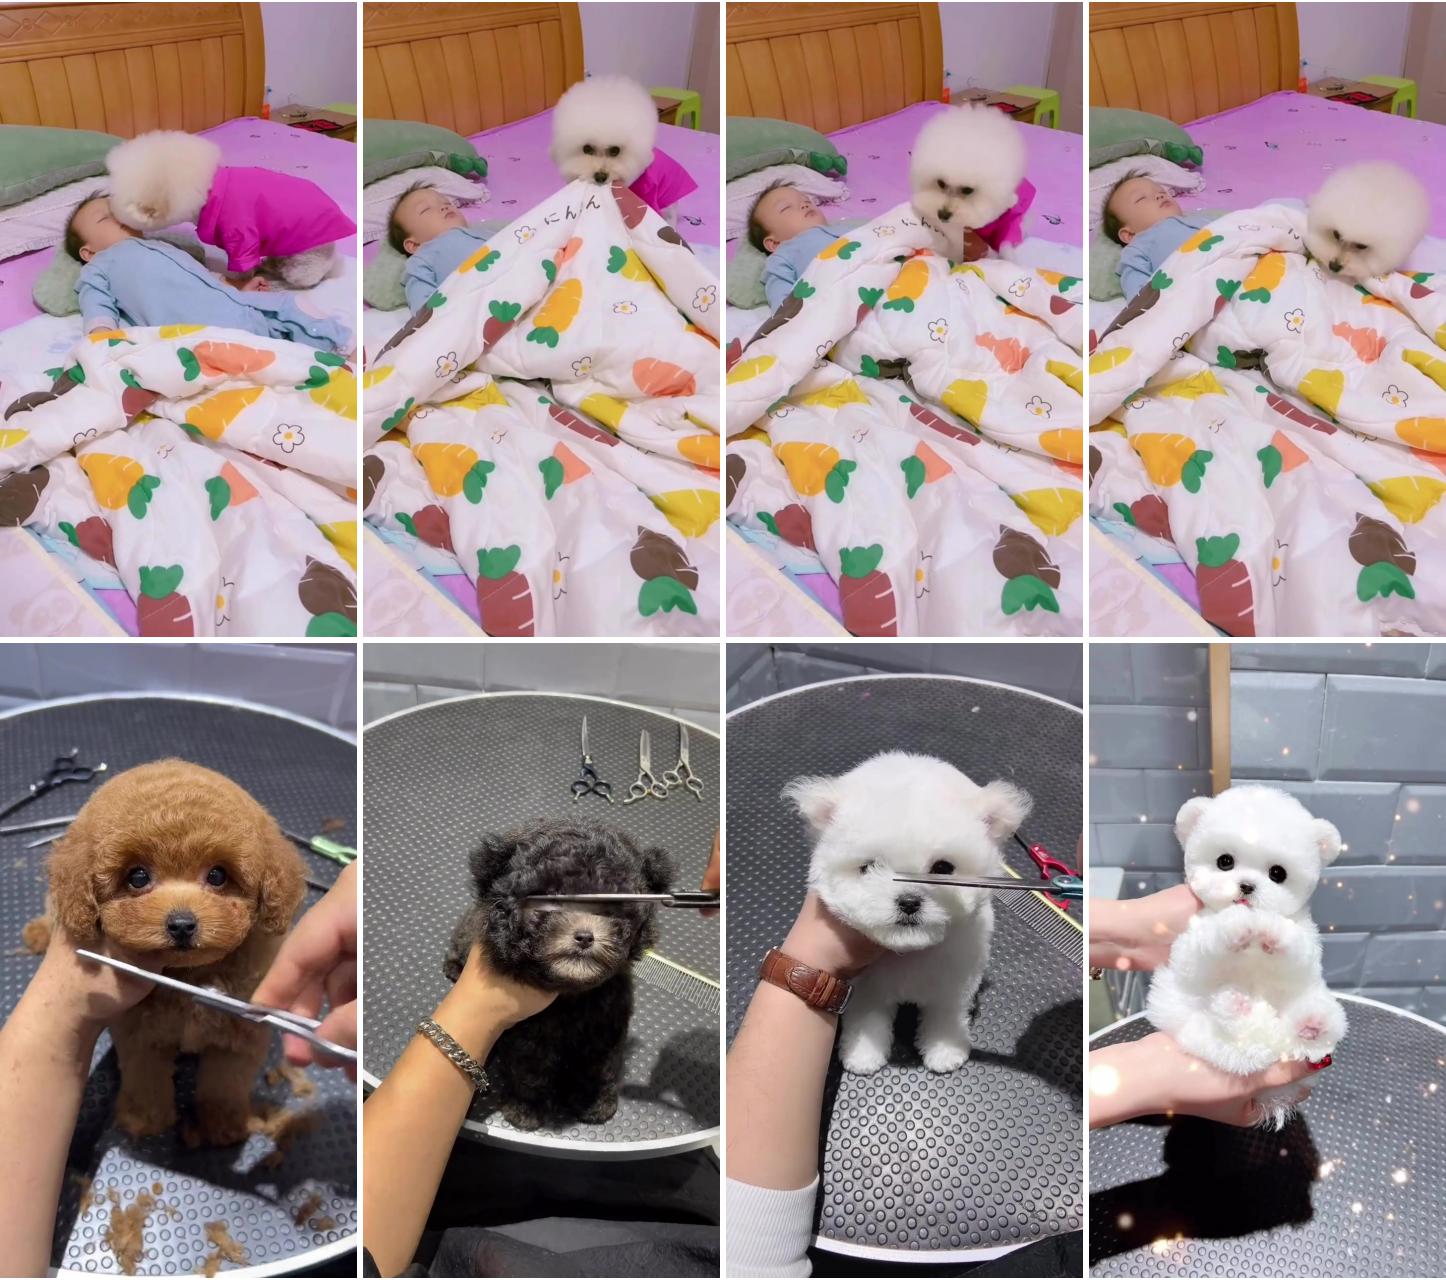 Dog pet to take care of the little baby with love; the art of grooming has never been this cute 